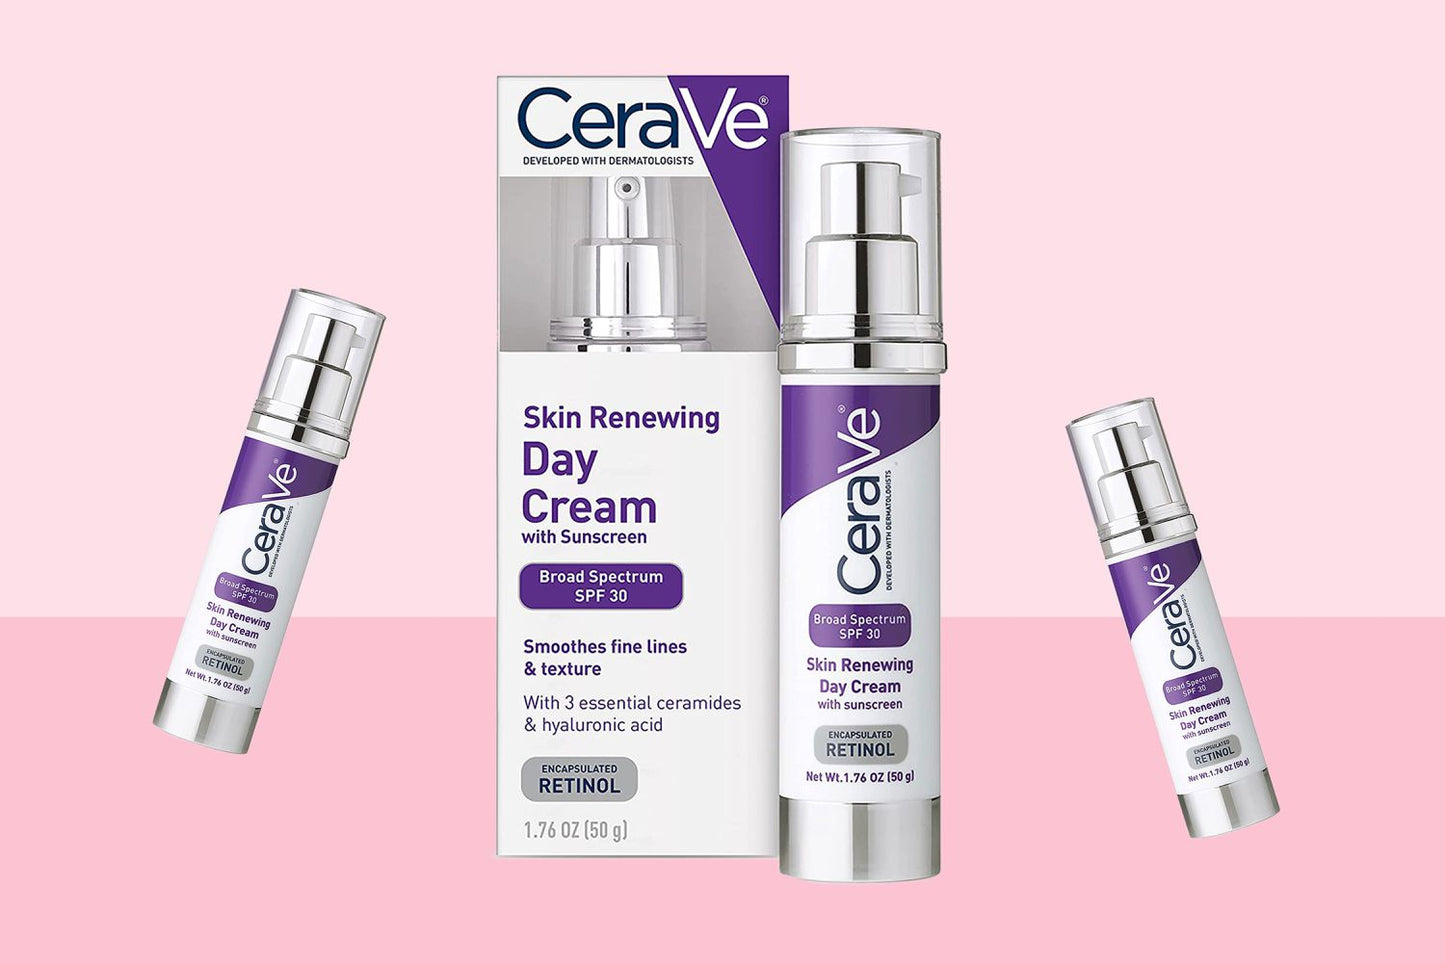 CeraVe, Skin Renewing Day Cream with Sunscreen SPF30 50g All About Skin Doha Skincare Qatar Beauty Cosmetics Available in Qatar Available in Qatar Store all about skin doha qatar skincare cosmetics beauty 